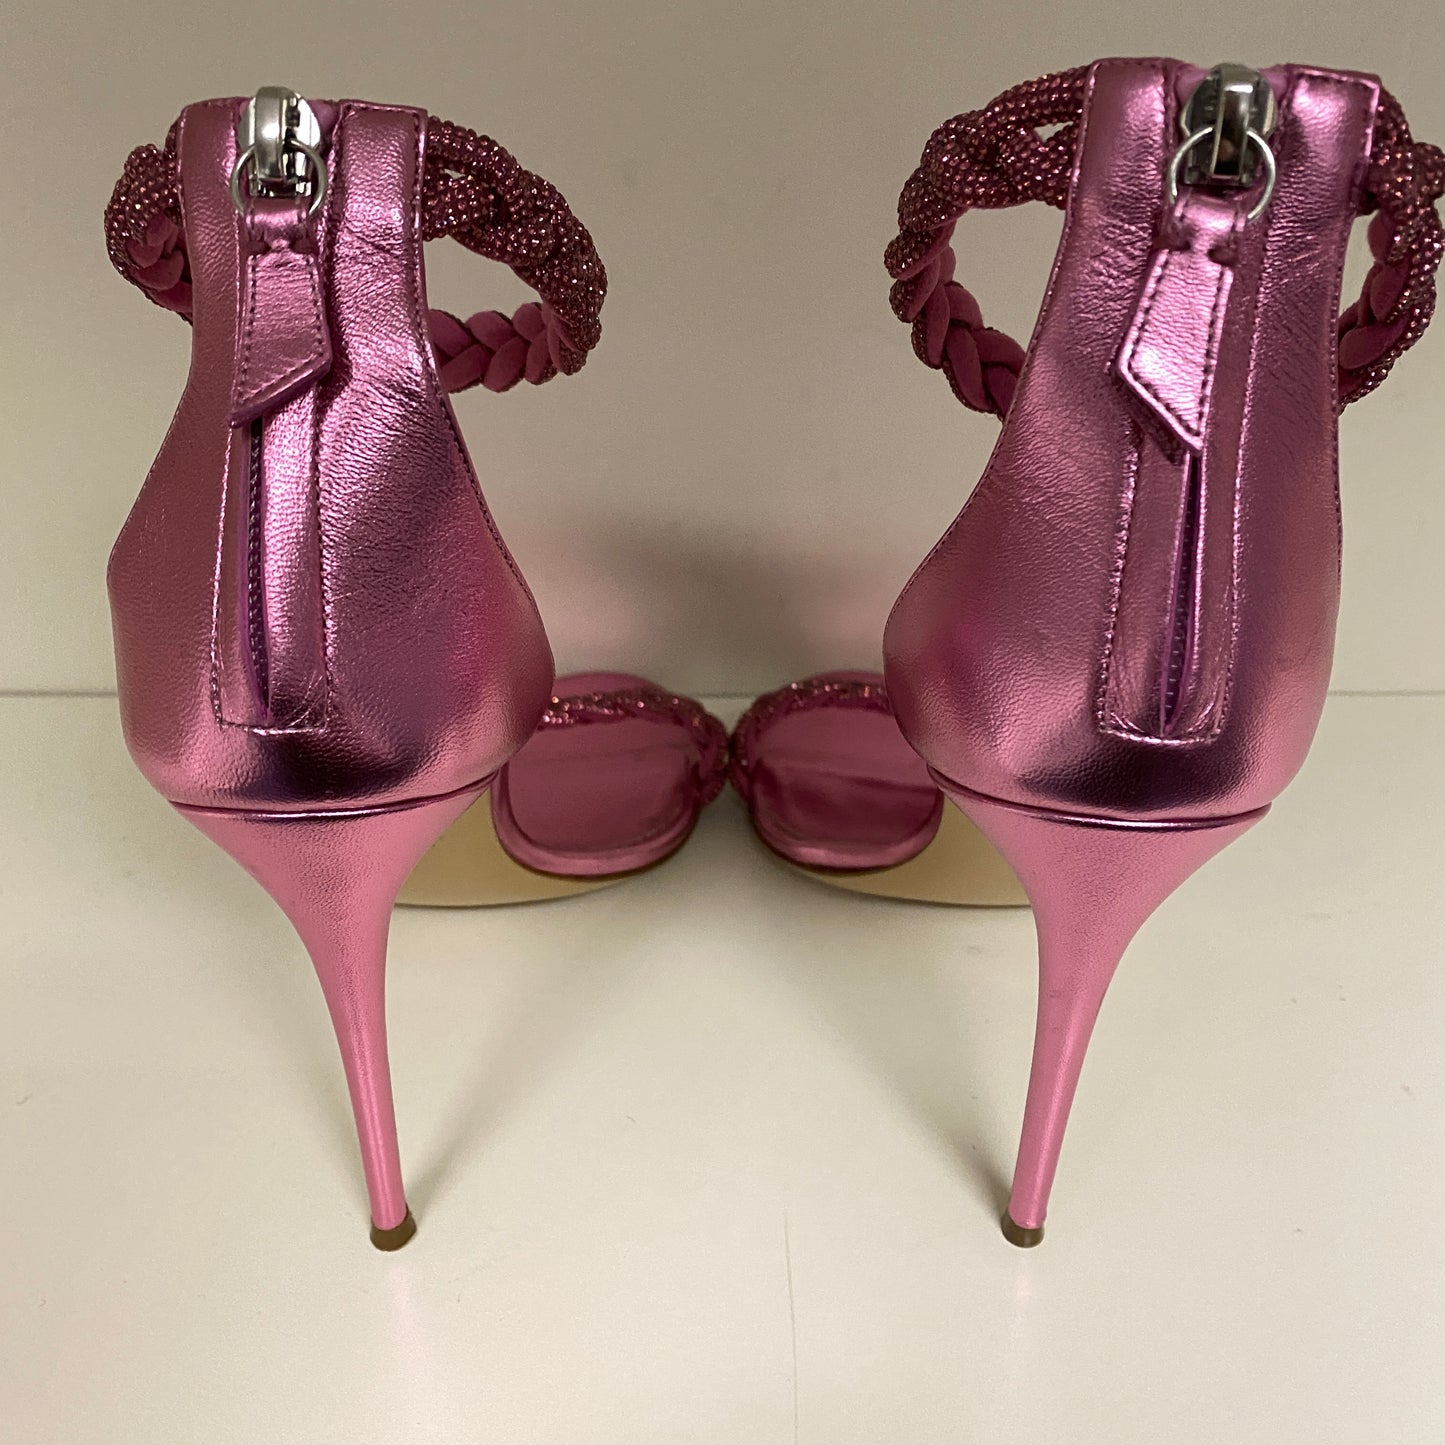 Casadei pink leather heels. Size 40